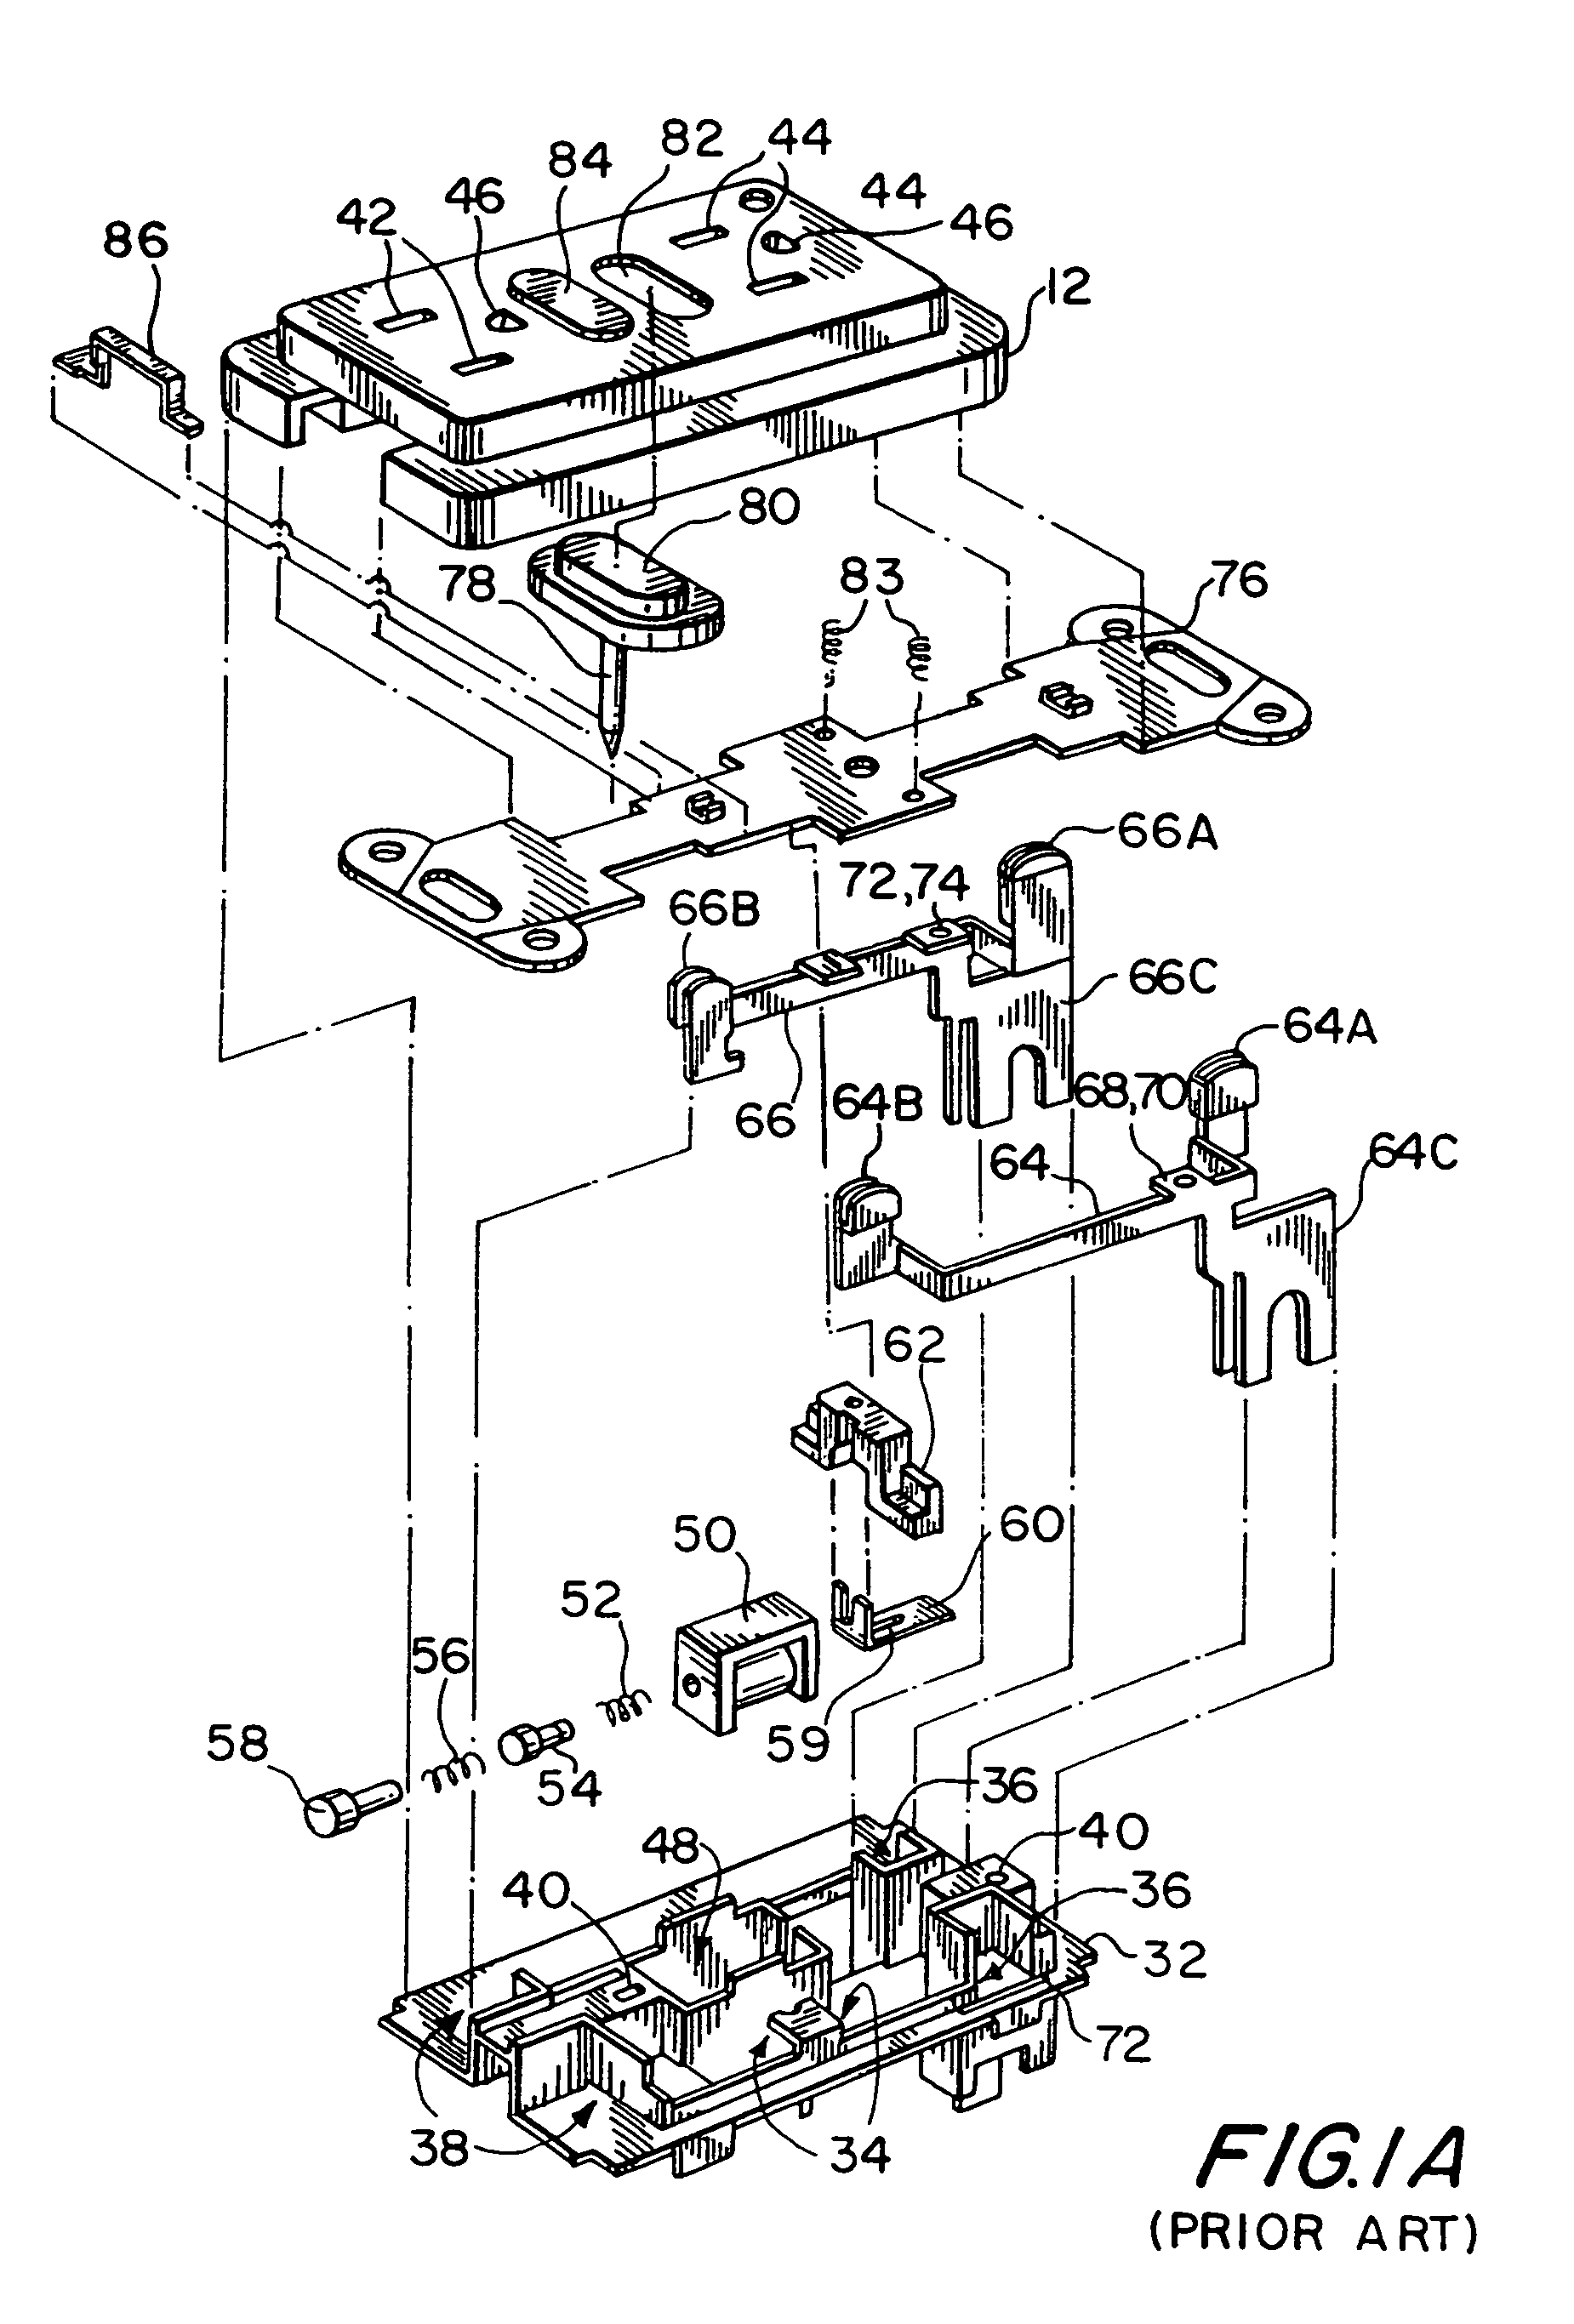 Reset lockout mechanism and independent trip mechanism for center latch circuit interrupting device